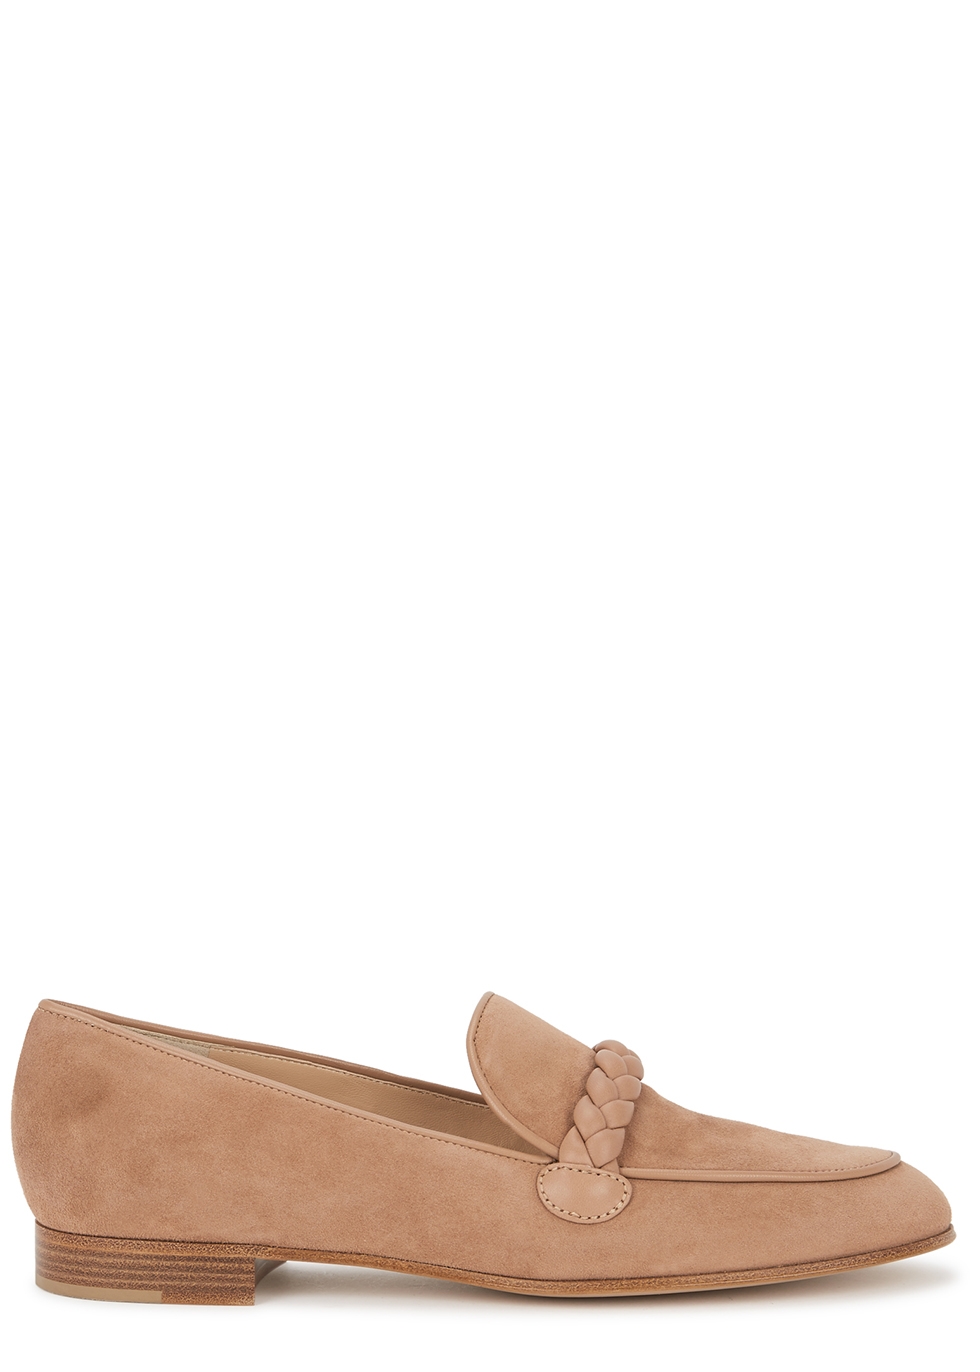 Dusky pink suede loafers